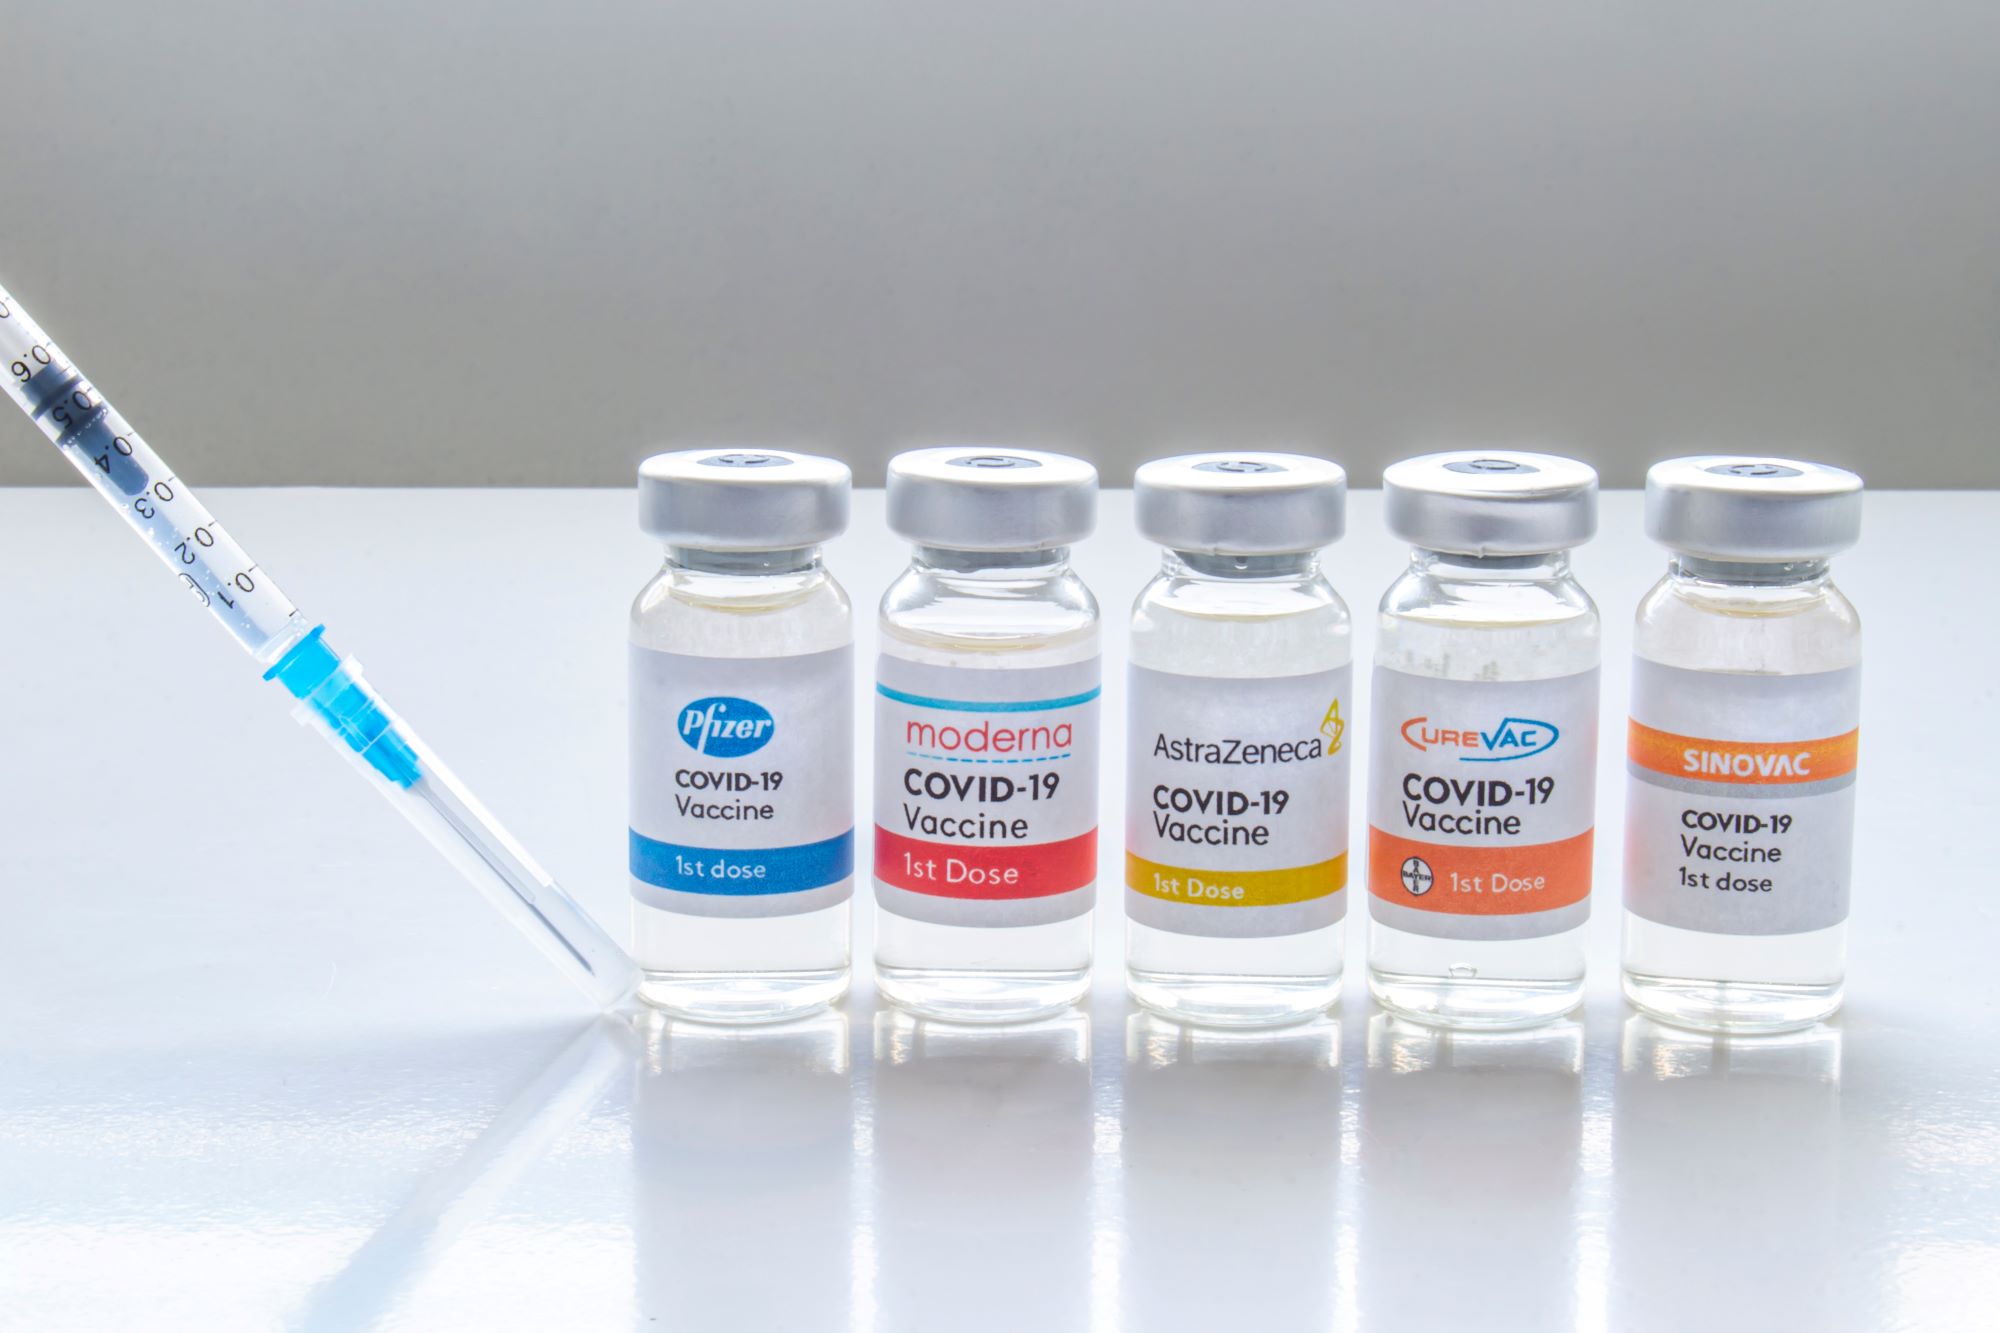 COVID-19 ‘Mix and Match’ Vaccines to Undergo Clinical Tests